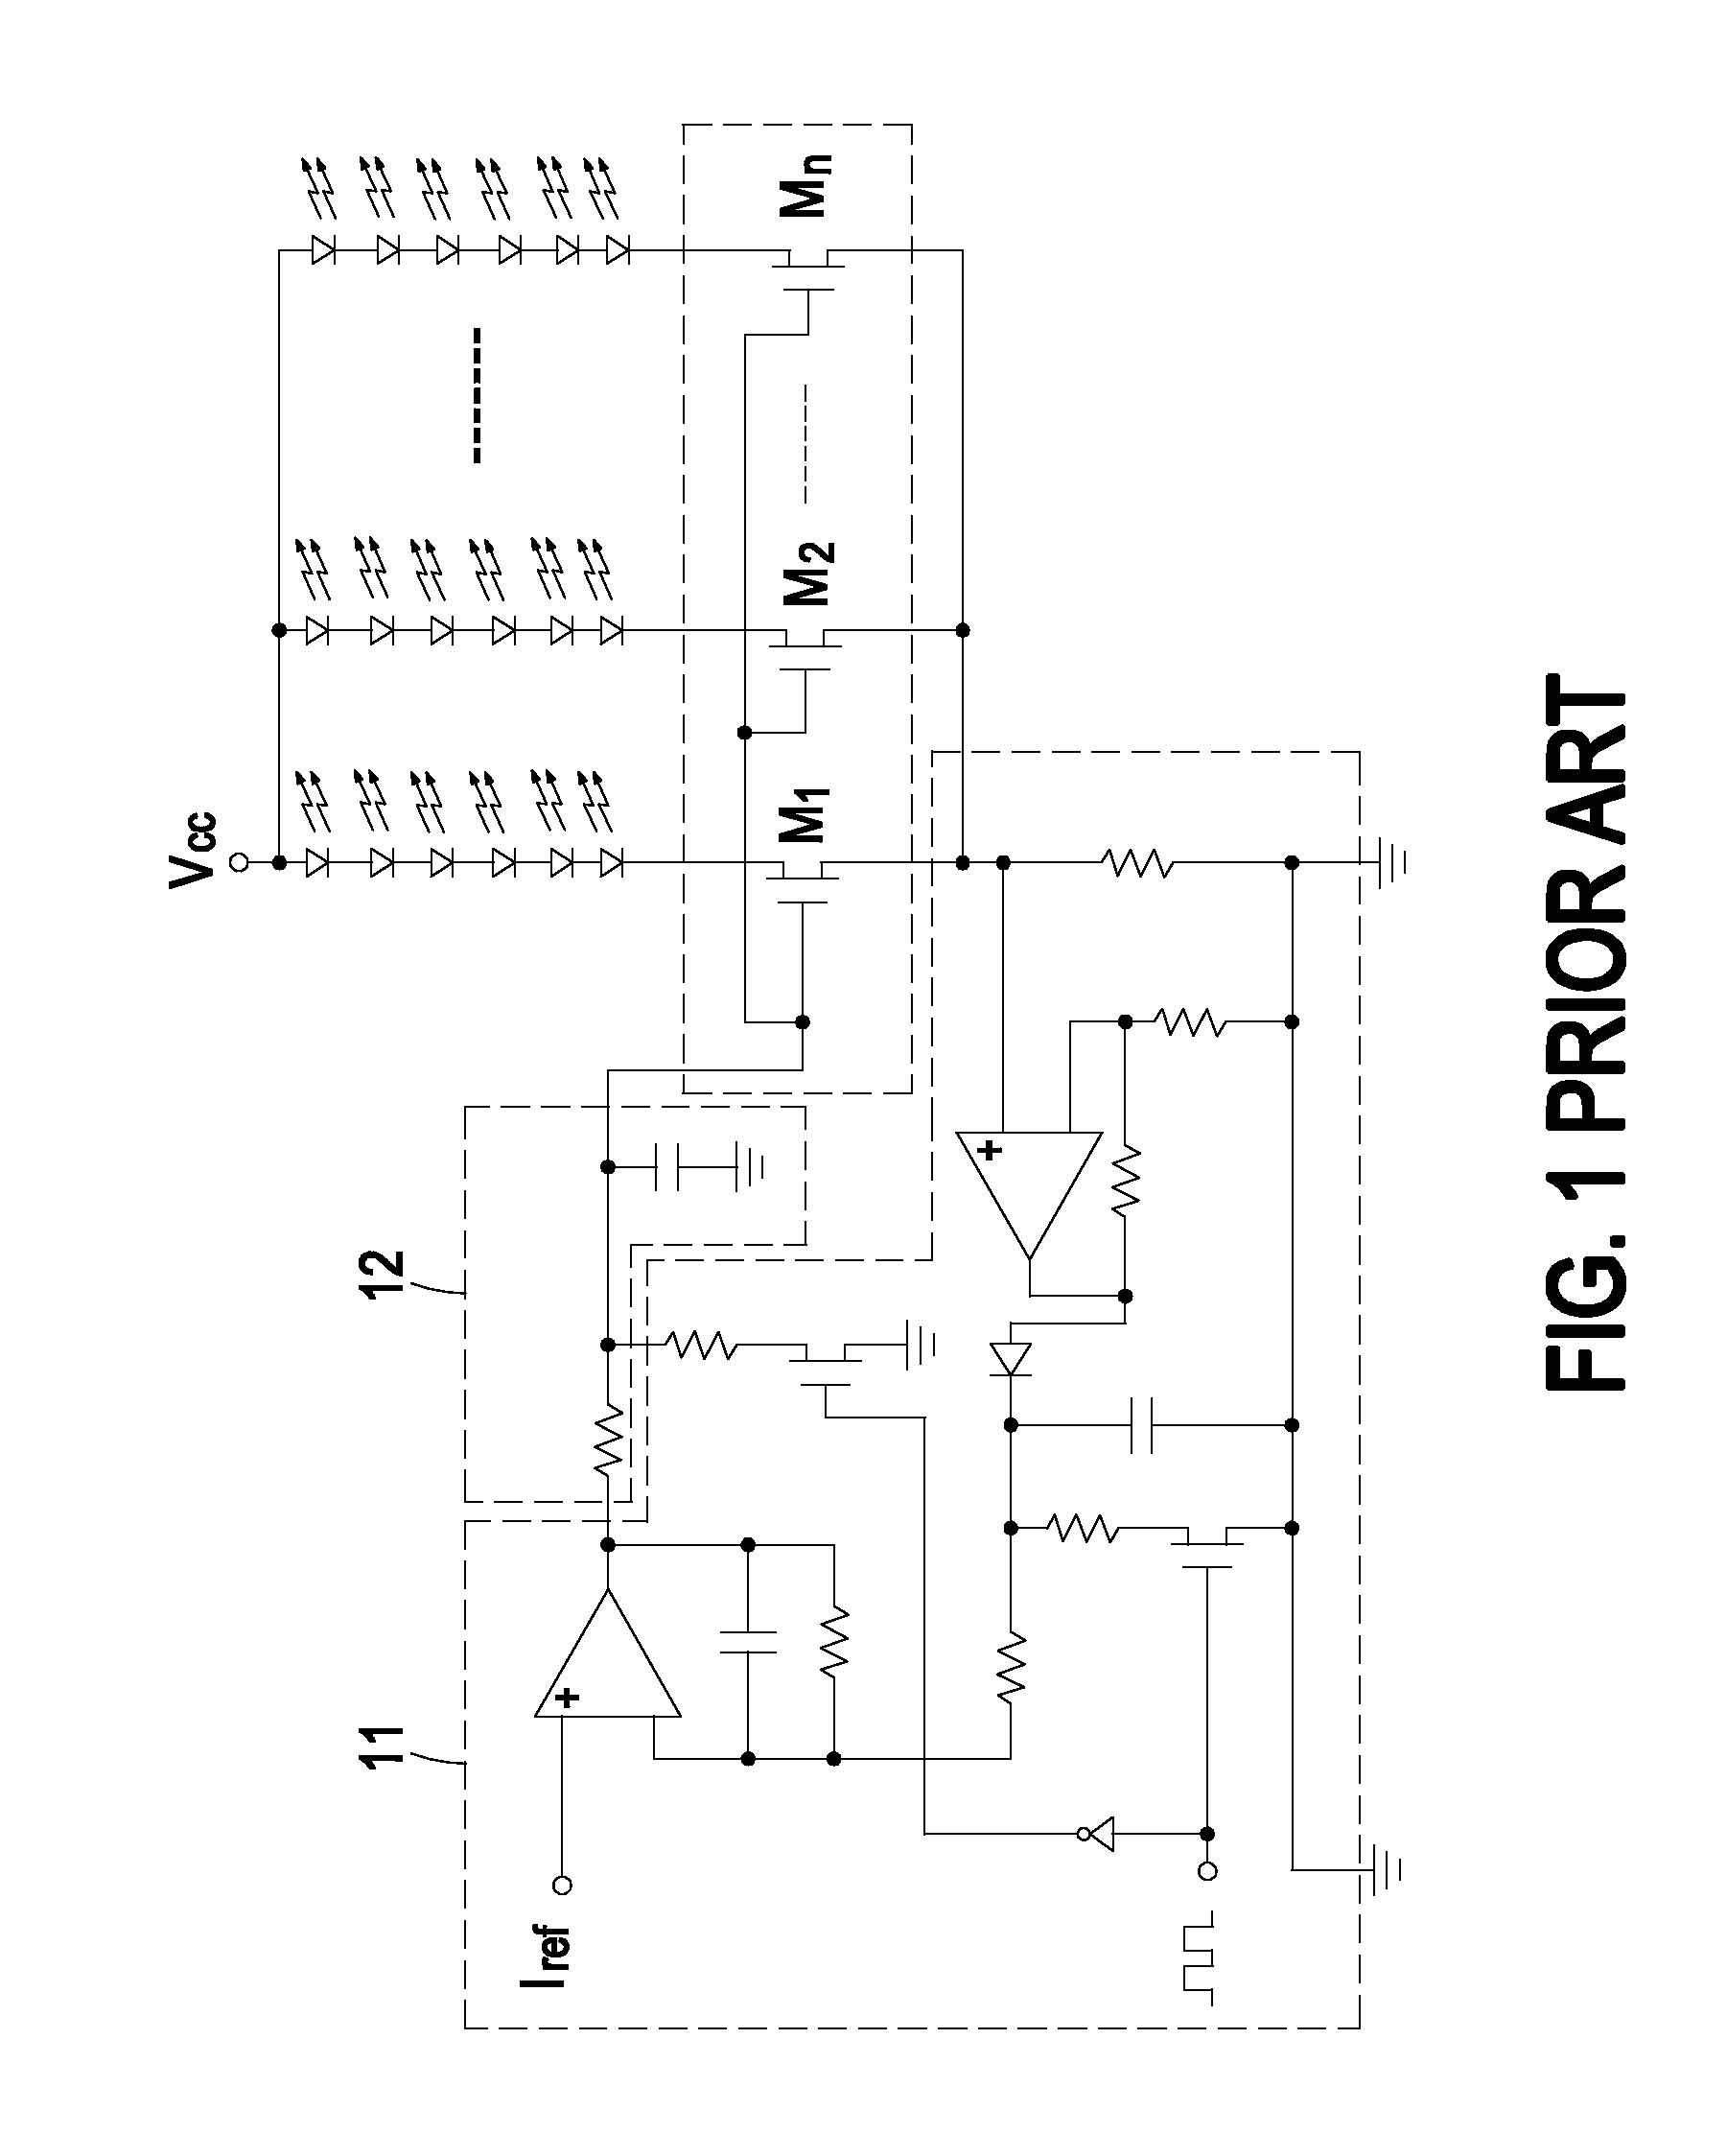 Current-sharing supply circuit for driving multiple sets of DC loads